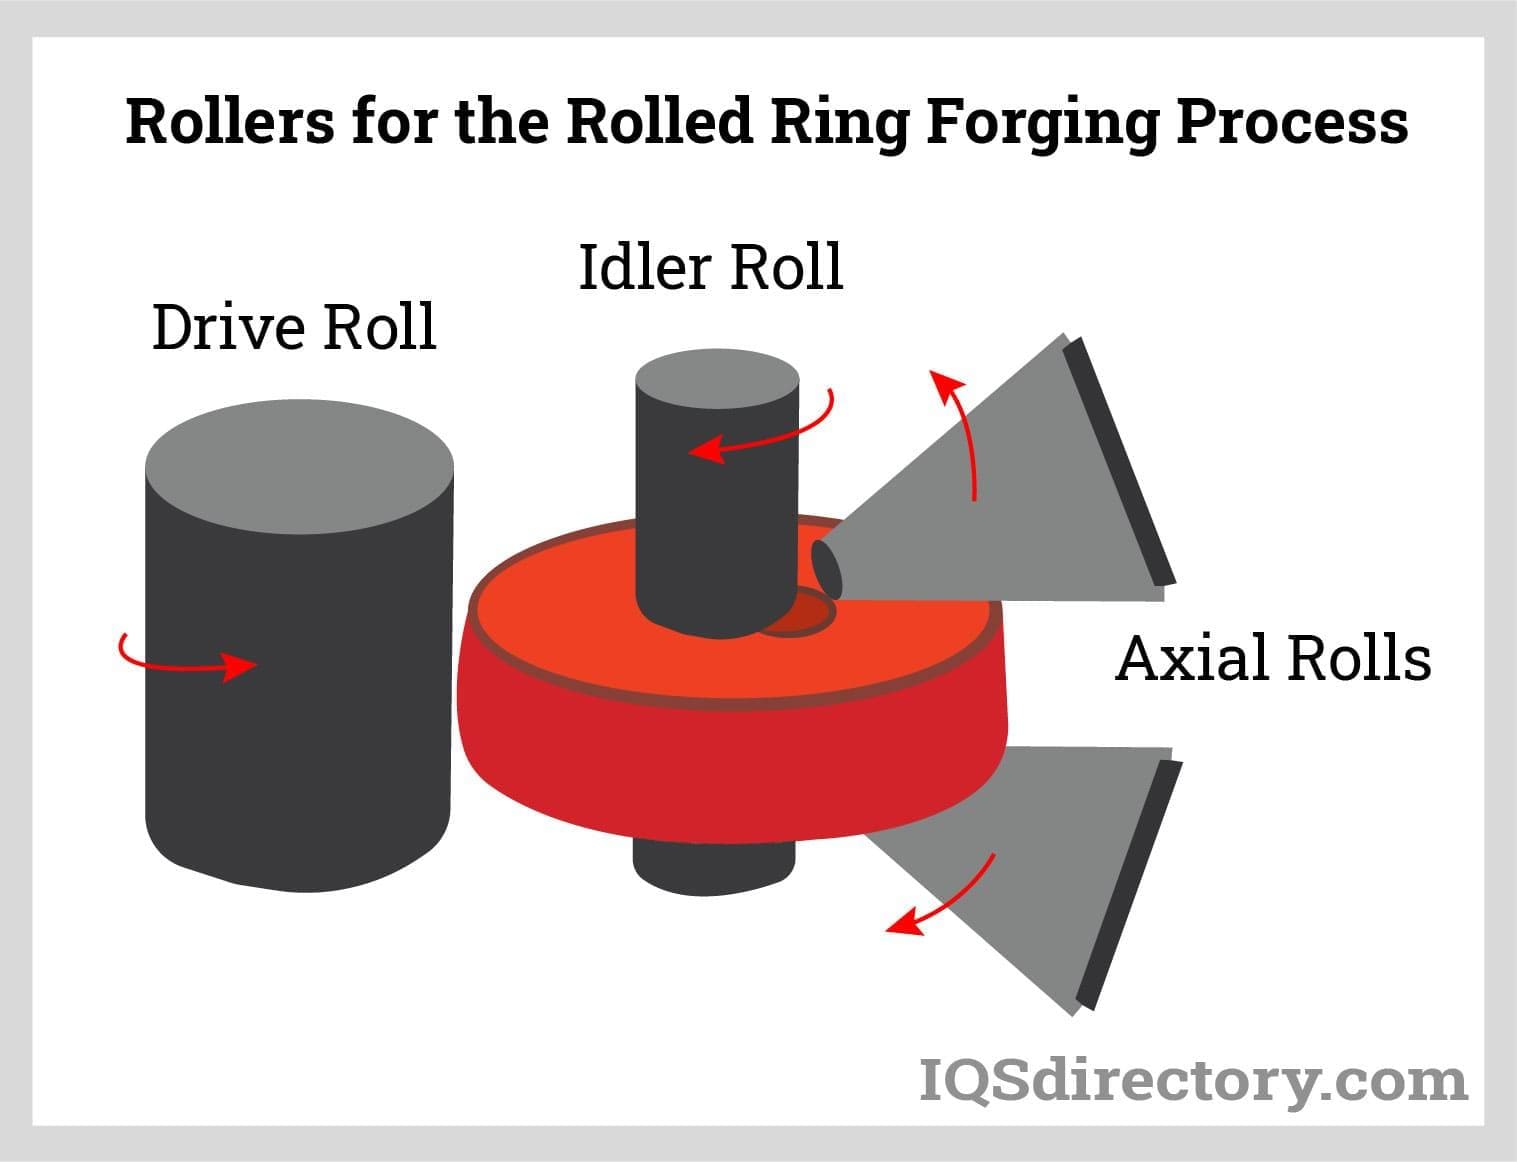 Rollers for the Rolled Ring Forging Process